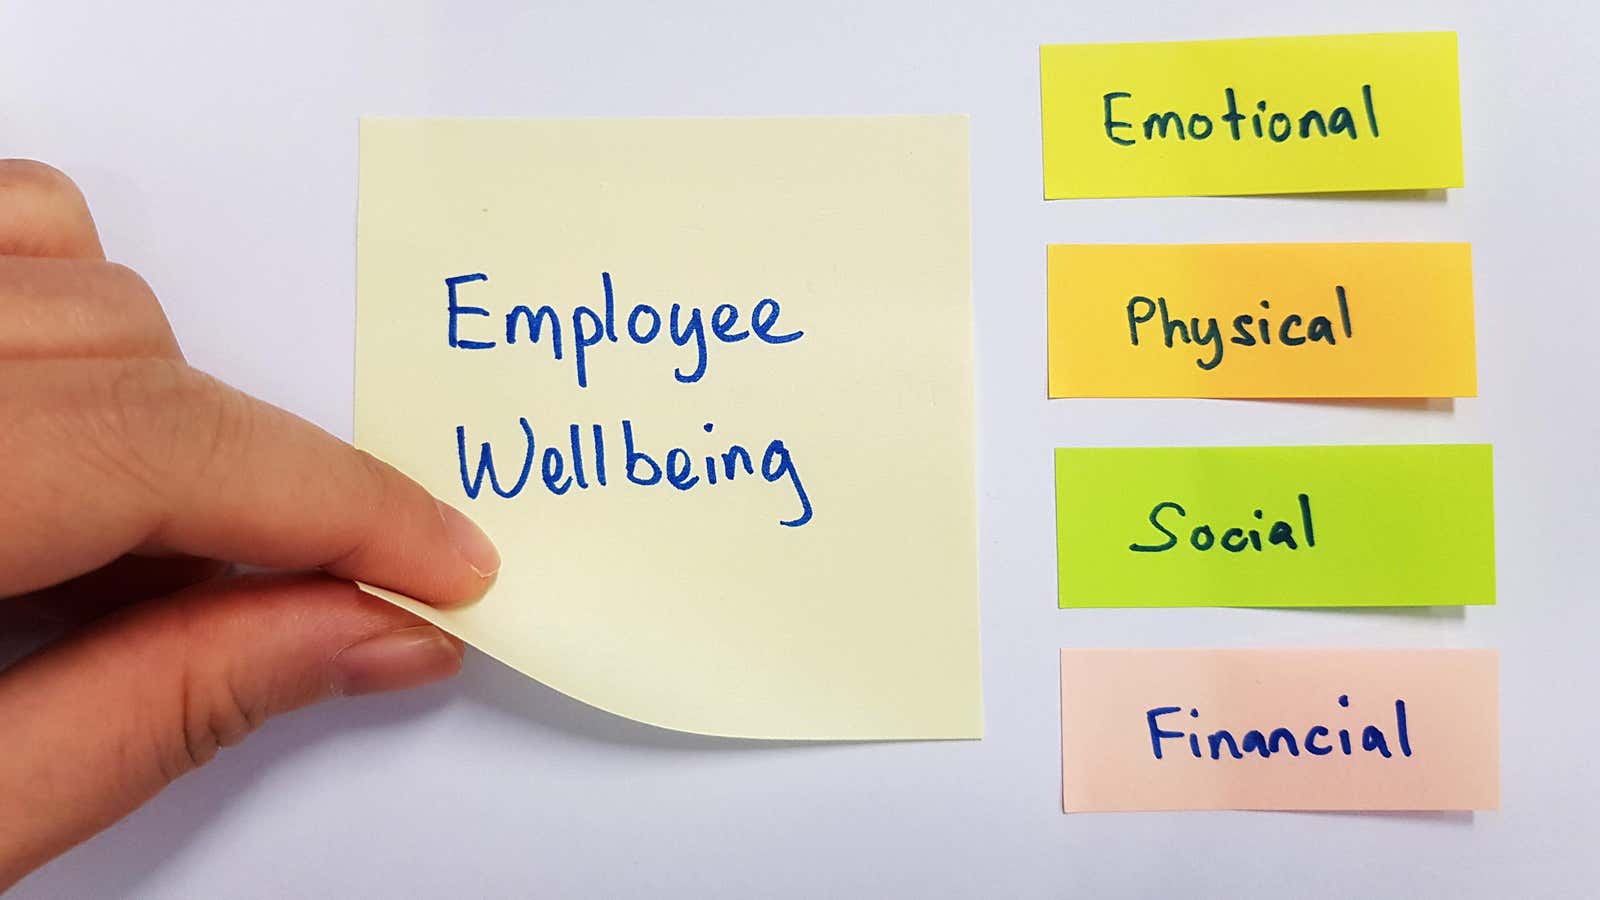 Want to support your employees' mental health at work? Try these science-based actions